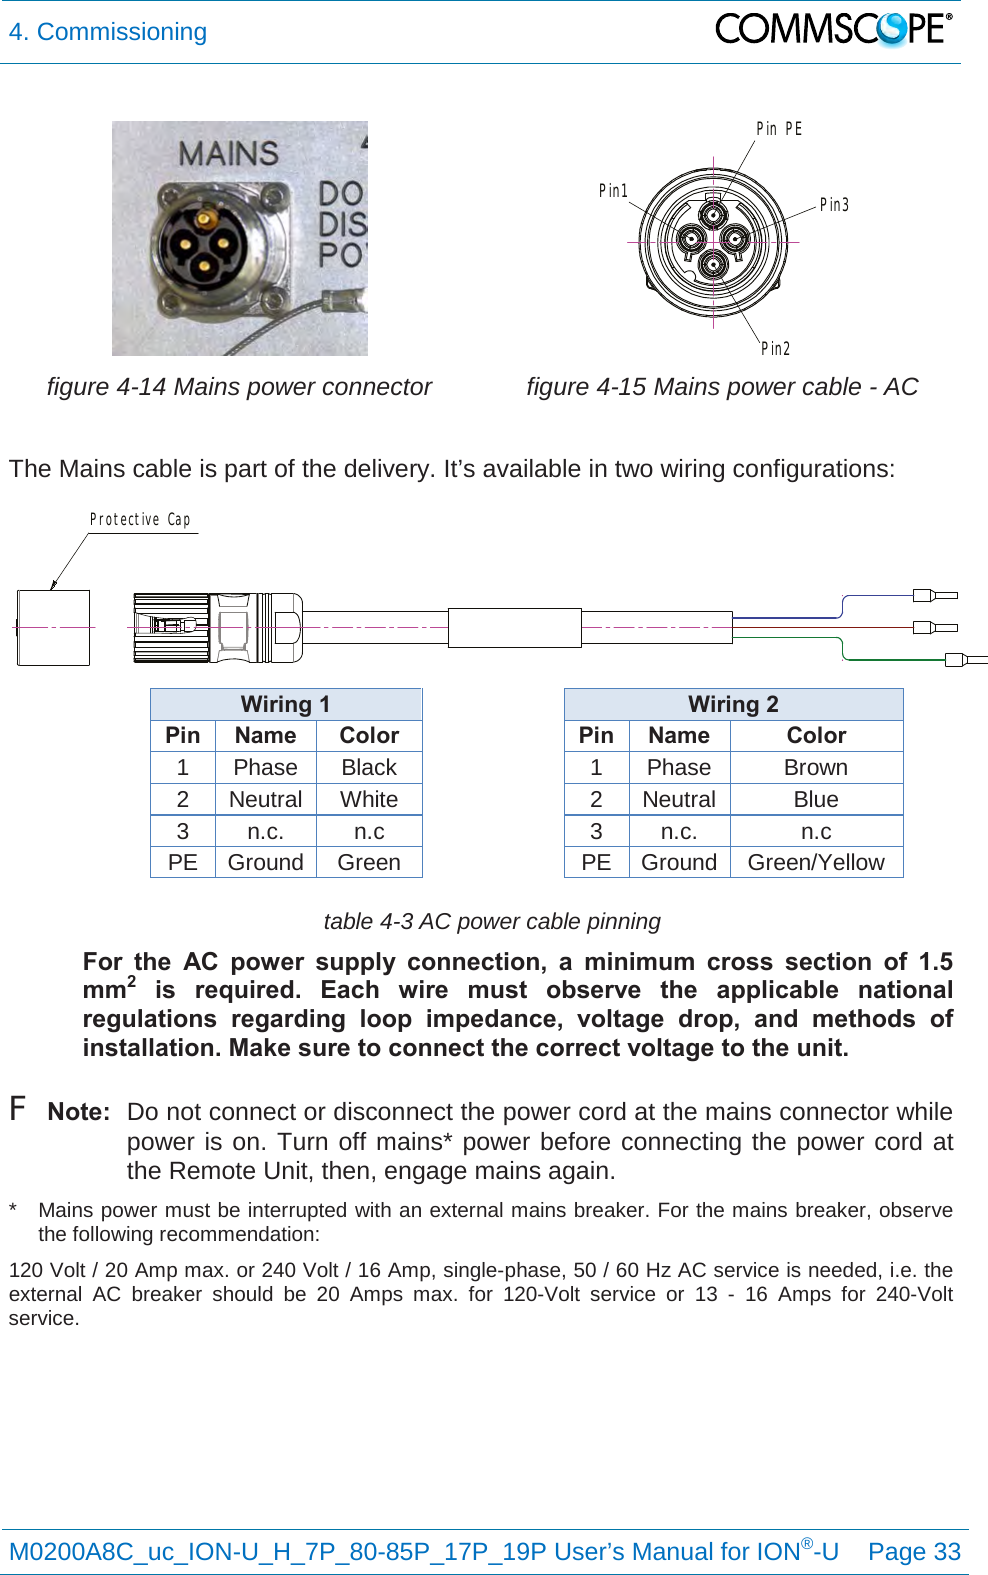 4. Commissioning   M0200A8C_uc_ION-U_H_7P_80-85P_17P_19P User’s Manual for ION®-U  Page 33     figure 4-14 Mains power connector figure 4-15 Mains power cable - AC  The Mains cable is part of the delivery. It’s available in two wiring configurations:    Wiring 1 Pin Name Color 1 Phase Black 2 Neutral White 3 n.c. n.c PE Ground Green Wiring 2 Pin Name Color 1 Phase Brown 2 Neutral Blue 3 n.c. n.c PE Ground Green/Yellow table 4-3 AC power cable pinning  For the AC power supply connection, a minimum cross section of 1.5 mm2 is required. Each wire must observe the applicable national regulations regarding loop impedance, voltage drop, and methods of installation. Make sure to connect the correct voltage to the unit.  F Note:  Do not connect or disconnect the power cord at the mains connector while power is on. Turn off mains* power before connecting the power cord at the Remote Unit, then, engage mains again. *  Mains power must be interrupted with an external mains breaker. For the mains breaker, observe the following recommendation: 120 Volt / 20 Amp max. or 240 Volt / 16 Amp, single-phase, 50 / 60 Hz AC service is needed, i.e. the external AC breaker should be 20 Amps max. for 120-Volt service or 13 -  16 Amps for 240-Volt service.    Pin PEPin1Pin2Pin3Protective Cap